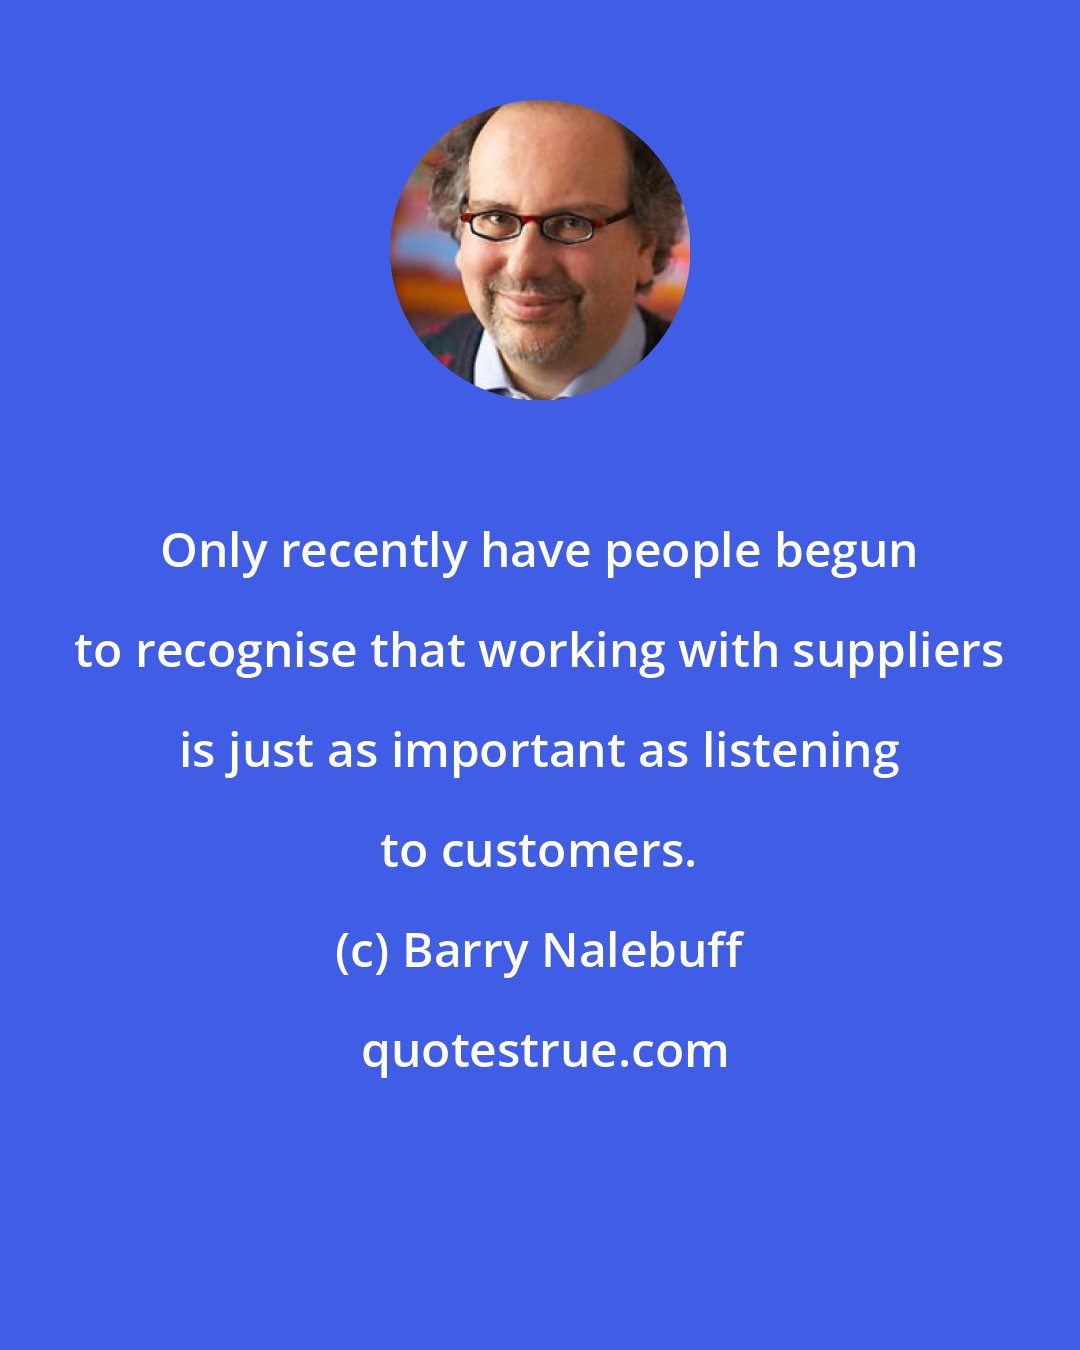 Barry Nalebuff: Only recently have people begun to recognise that working with suppliers is just as important as listening to customers.